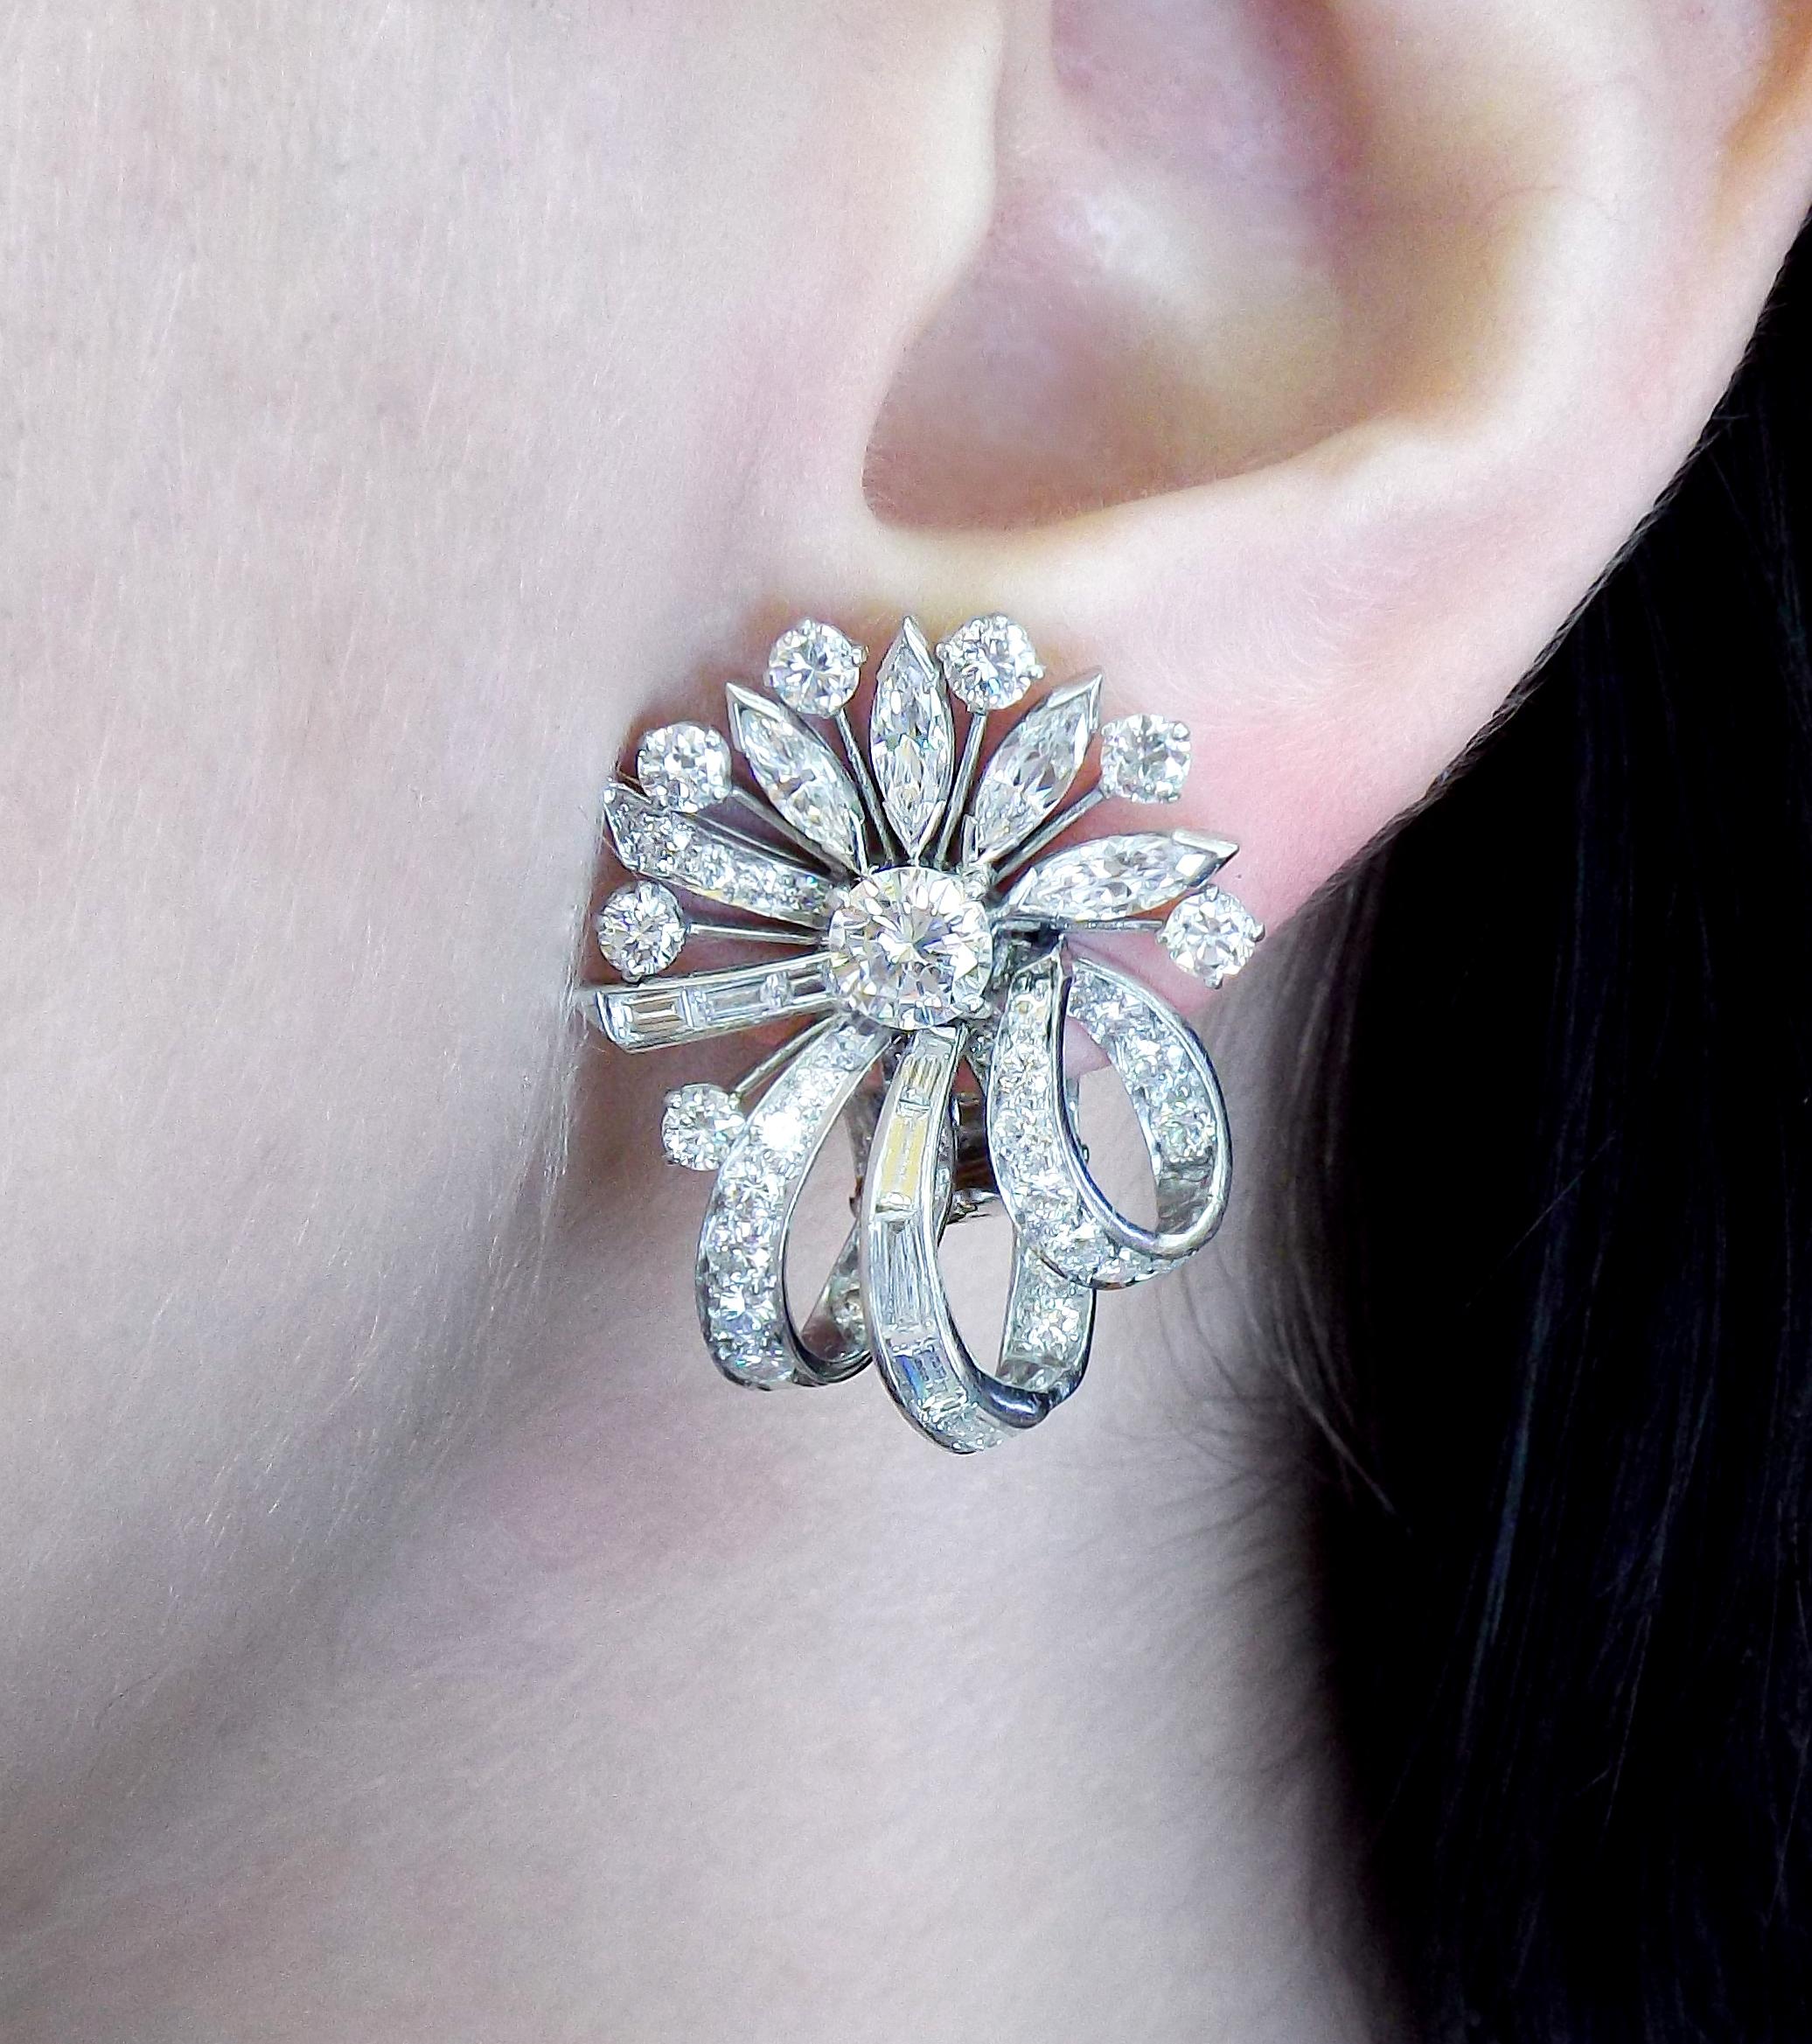 The earrings feature round brilliant-cut diamonds weighing a total of 1.00 carat, enhanced by full-cut diamonds weighing a total of 2.65 carats, accented by marquise-cut diamonds weighing a total of 1.10 carats, complemented by baguette-cut diamonds